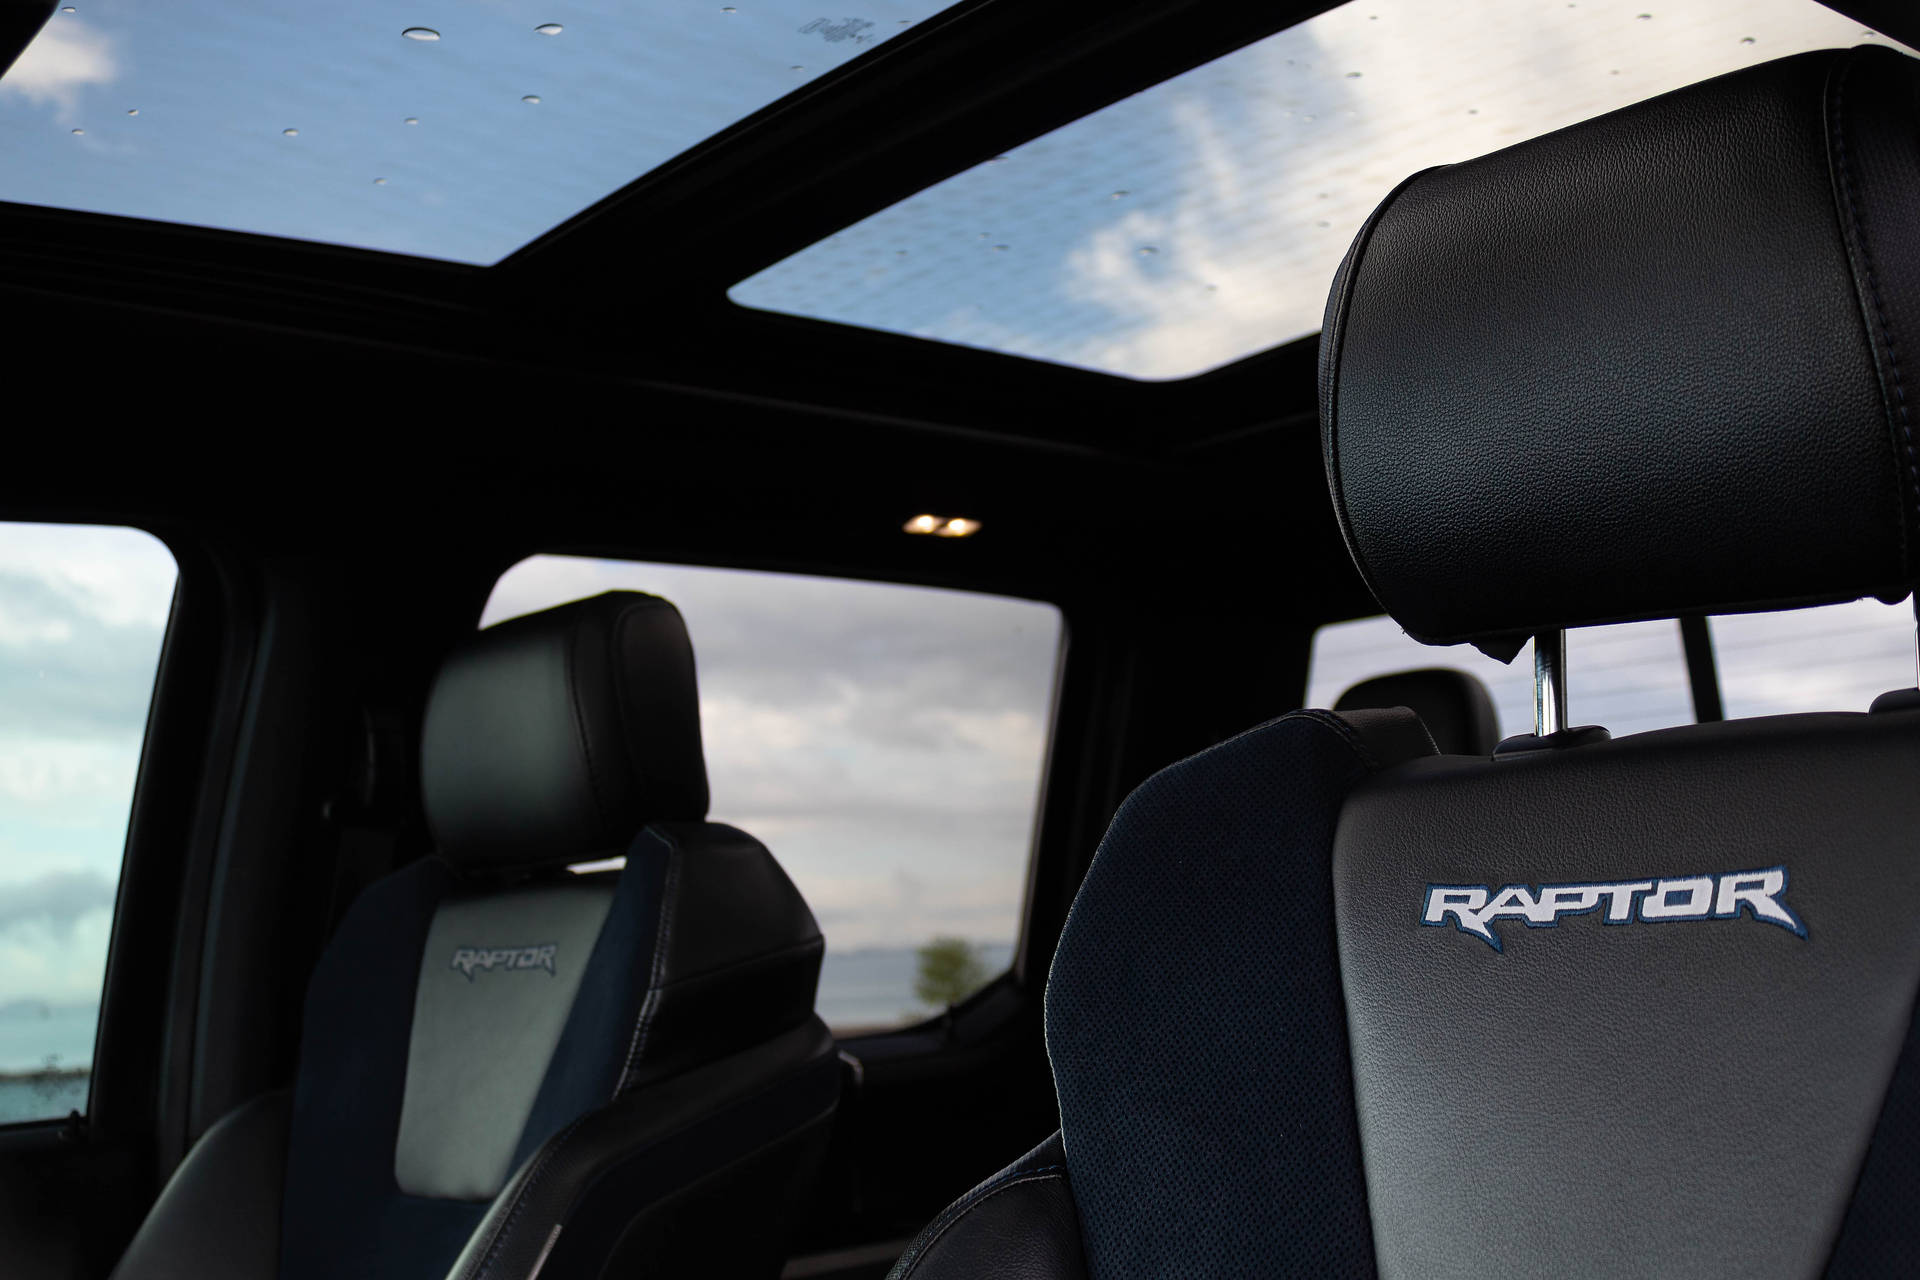 Powerful Ford Raptor With Panoramic Sunroof Background